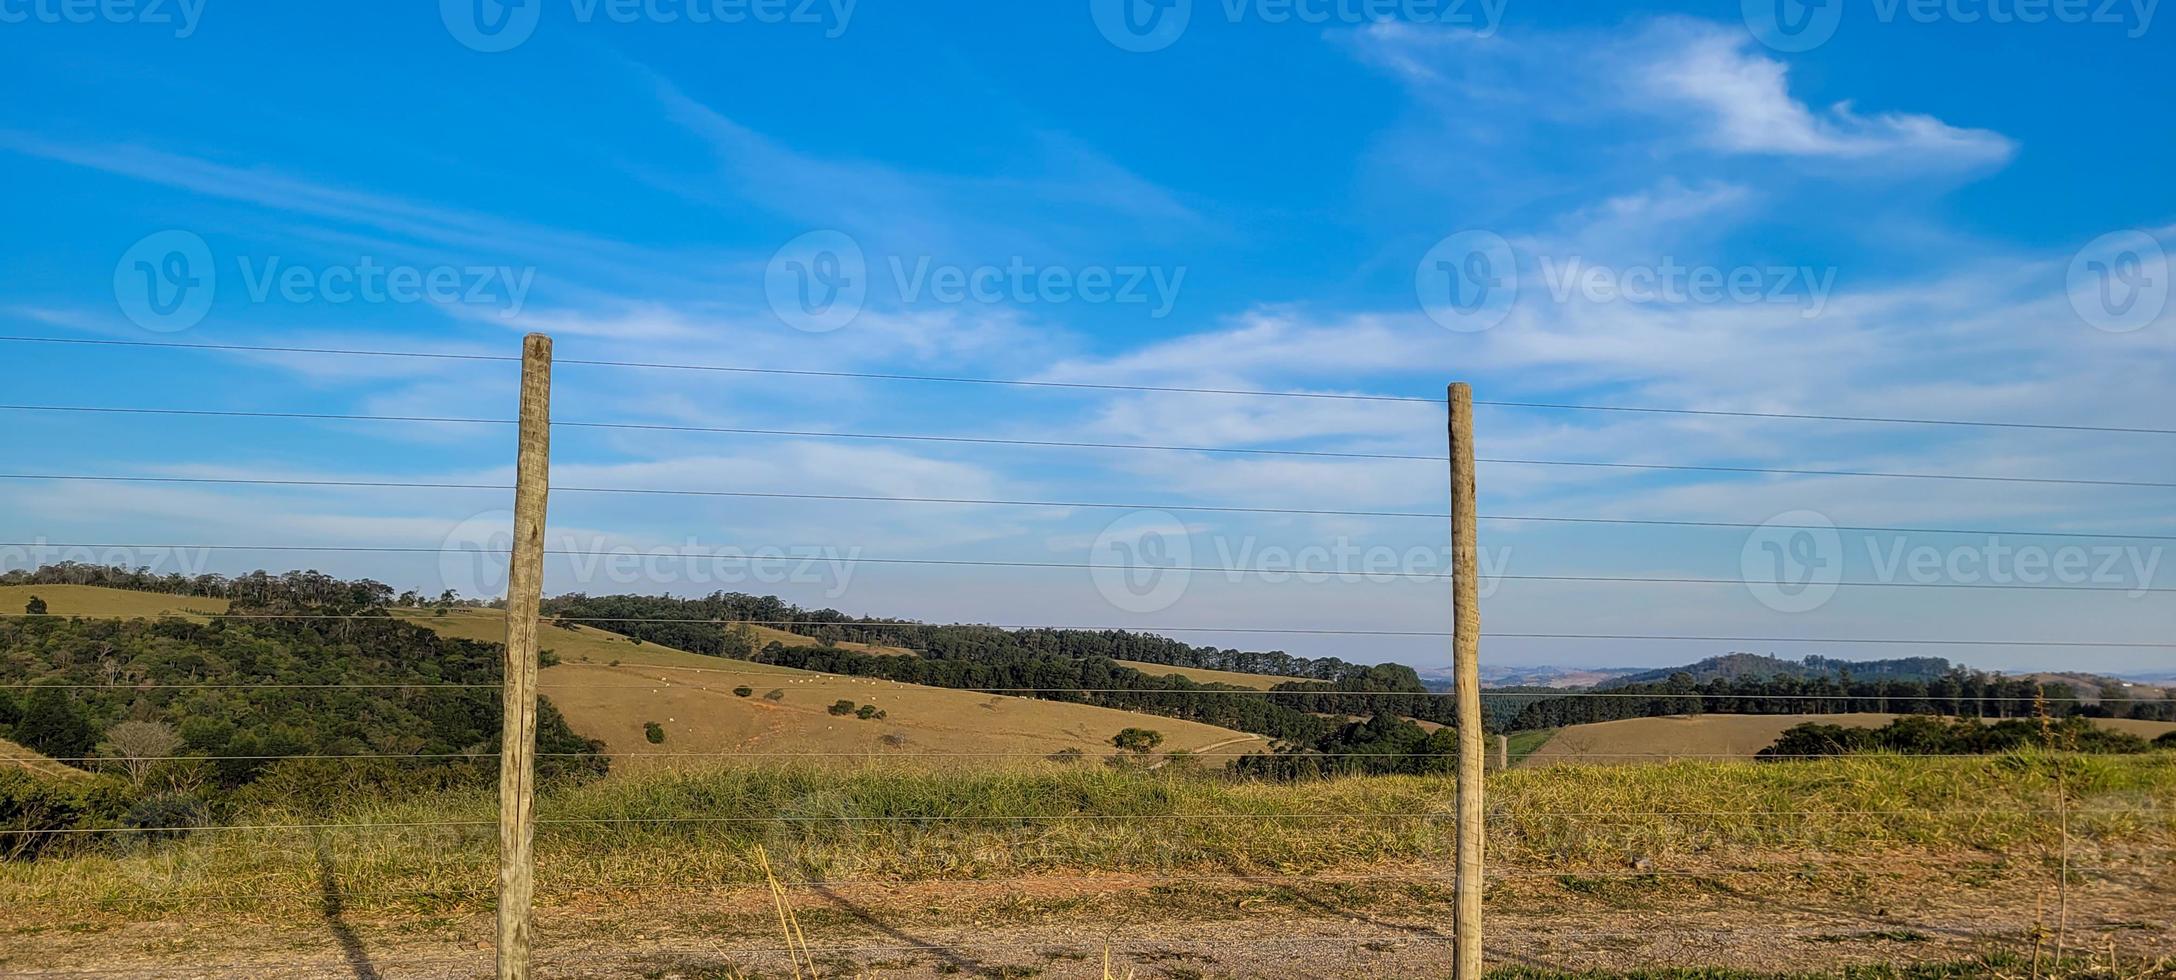 rural nature landscape in the interior of Brazil in a eucalyptus farm in the middle of nature photo